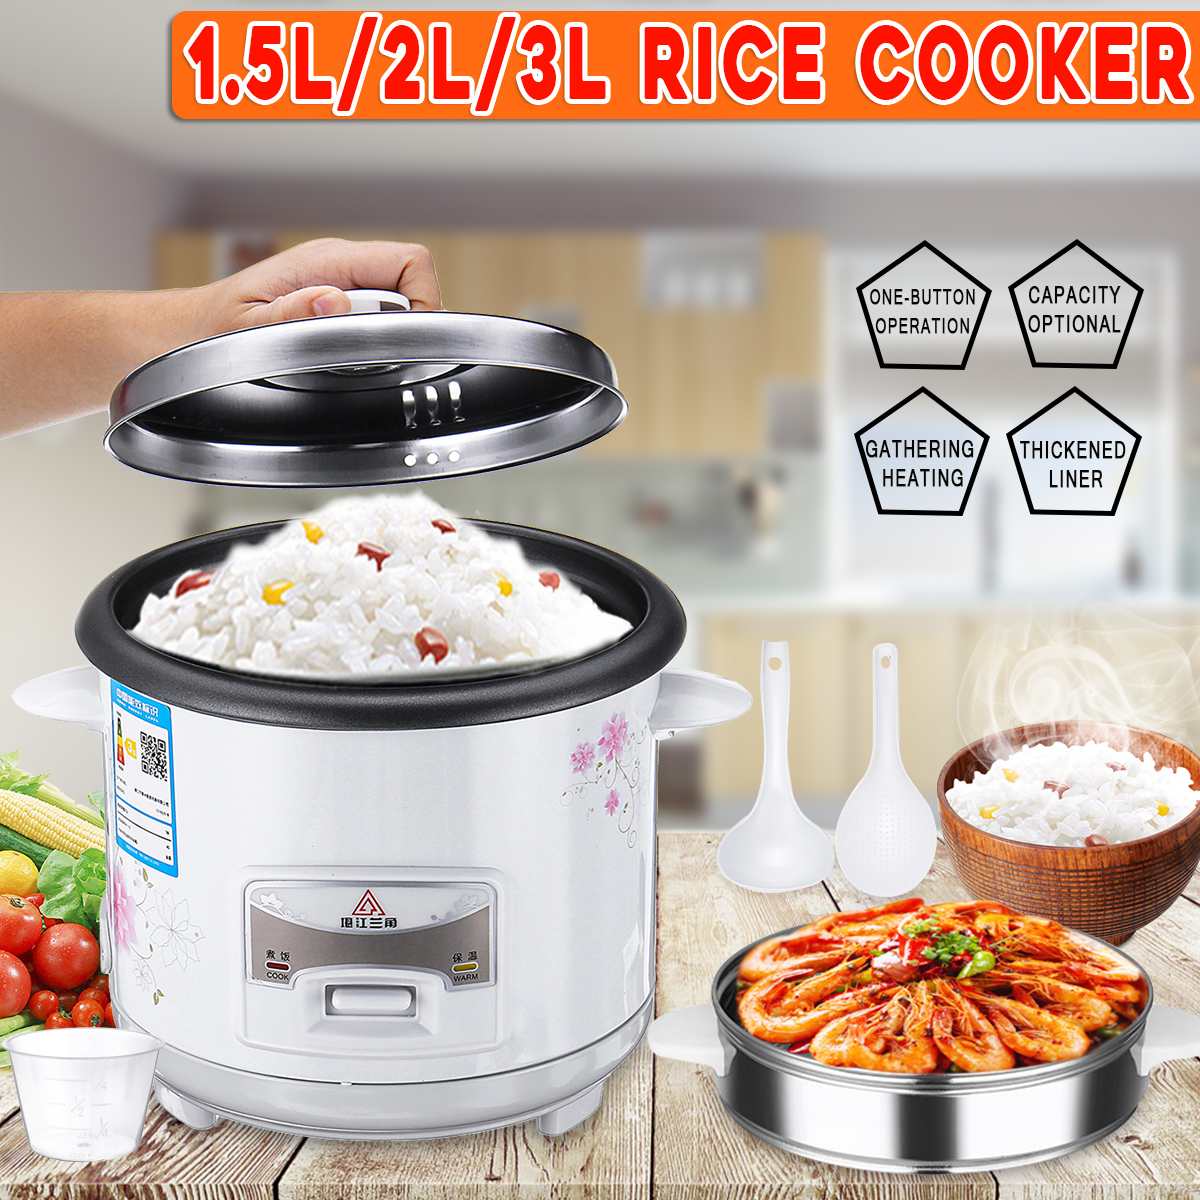 warmtoo 1.5/2/3L Automatic Electric Non-Stick Rice Cooker Food Steamer Cooking Warmer 220V 50Hz Mechanical Switch Button